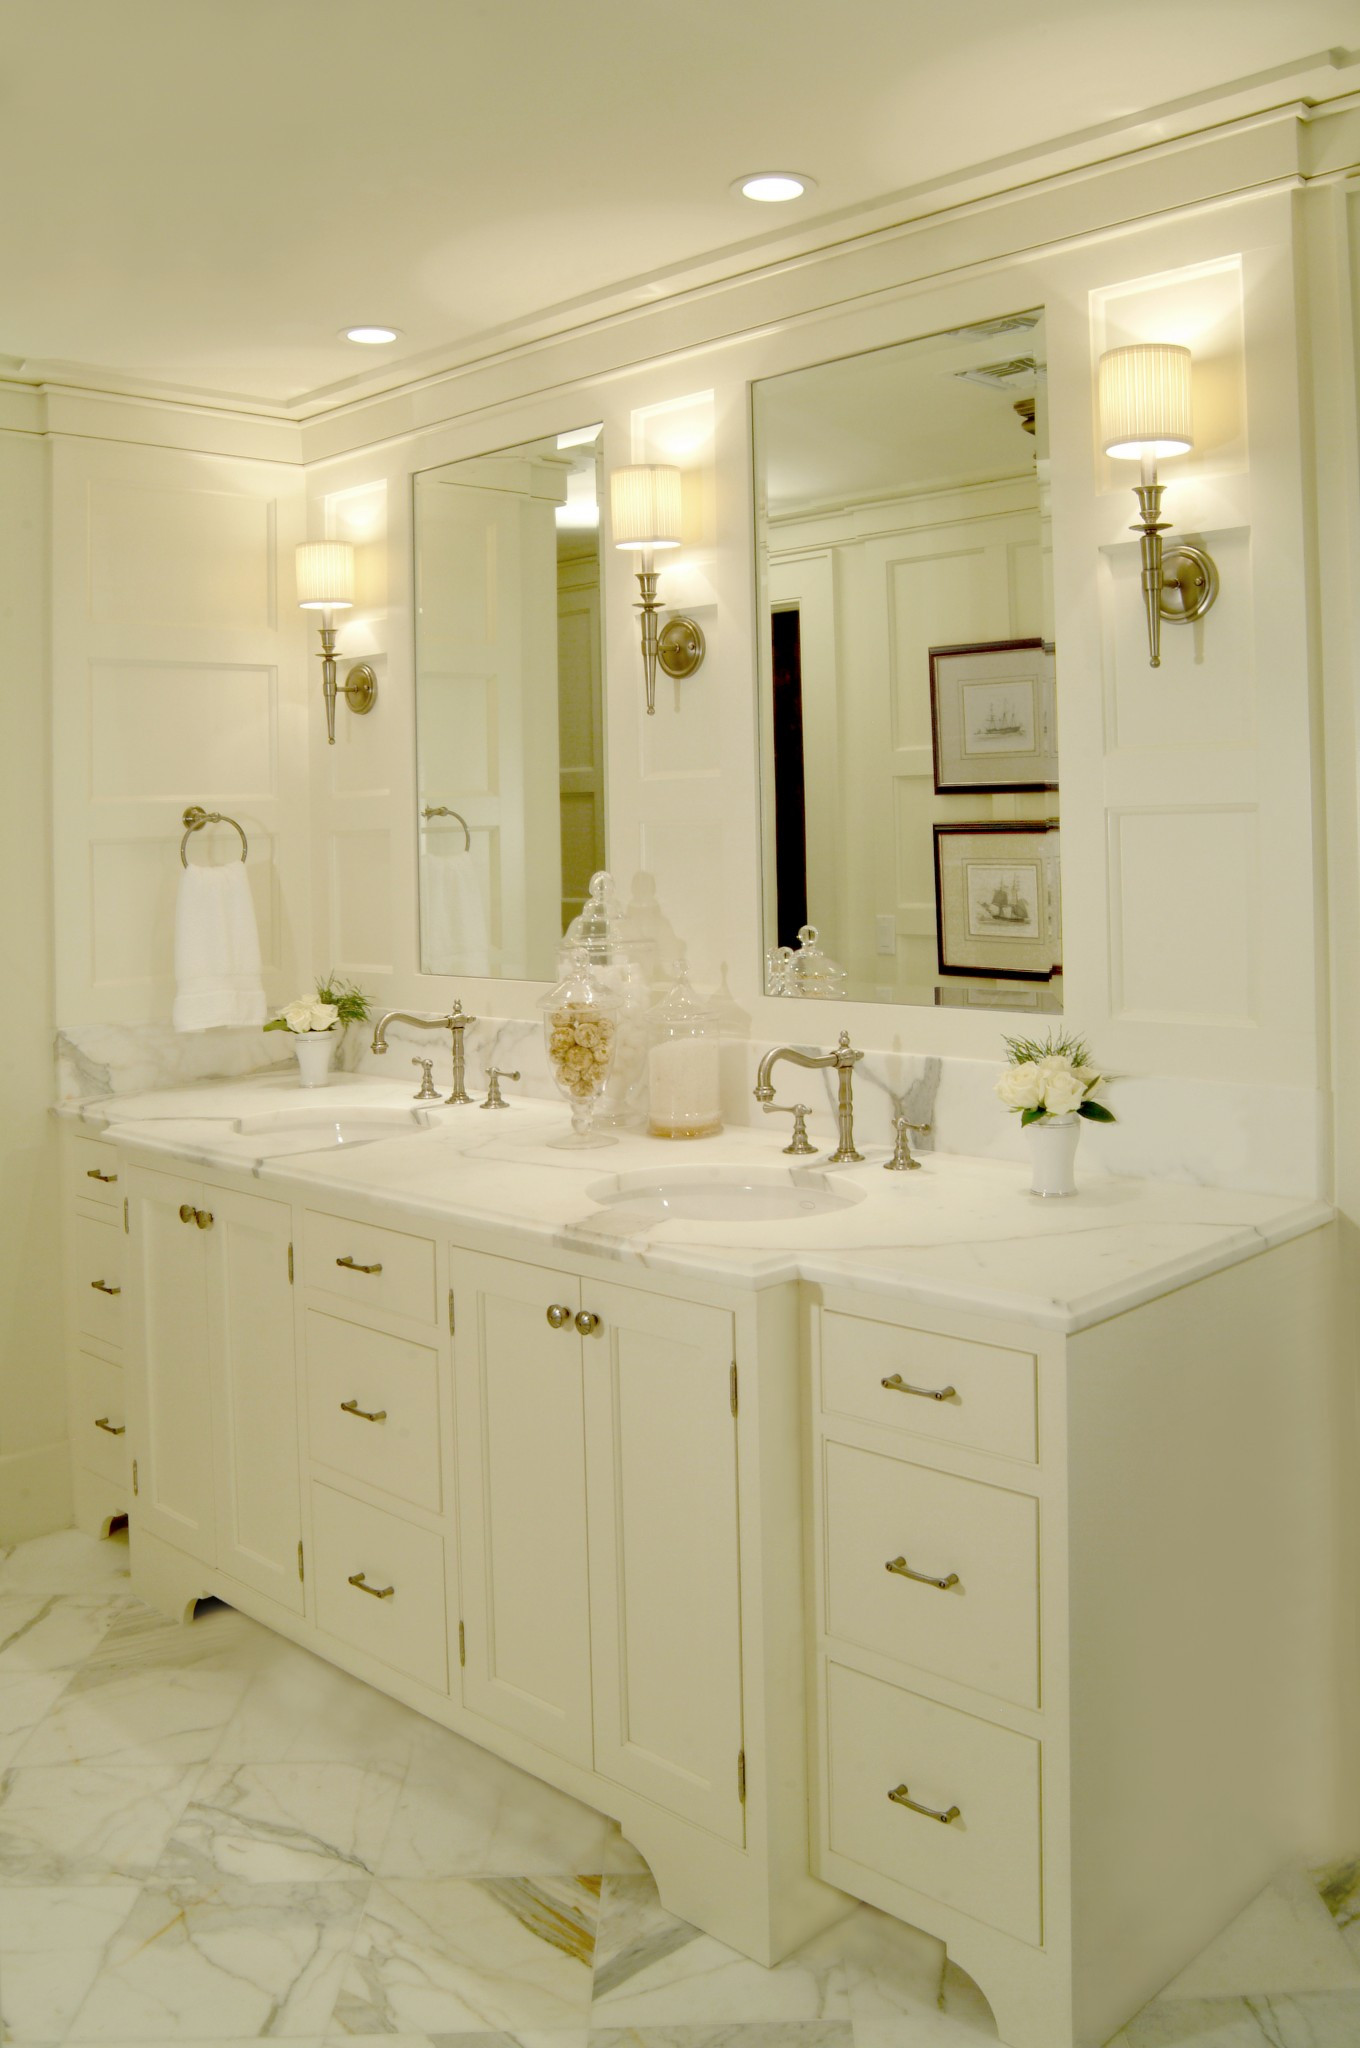 Recessed Lighting In Bathroom
 Tips To Designing A Layered Lighting Plan For Your Master